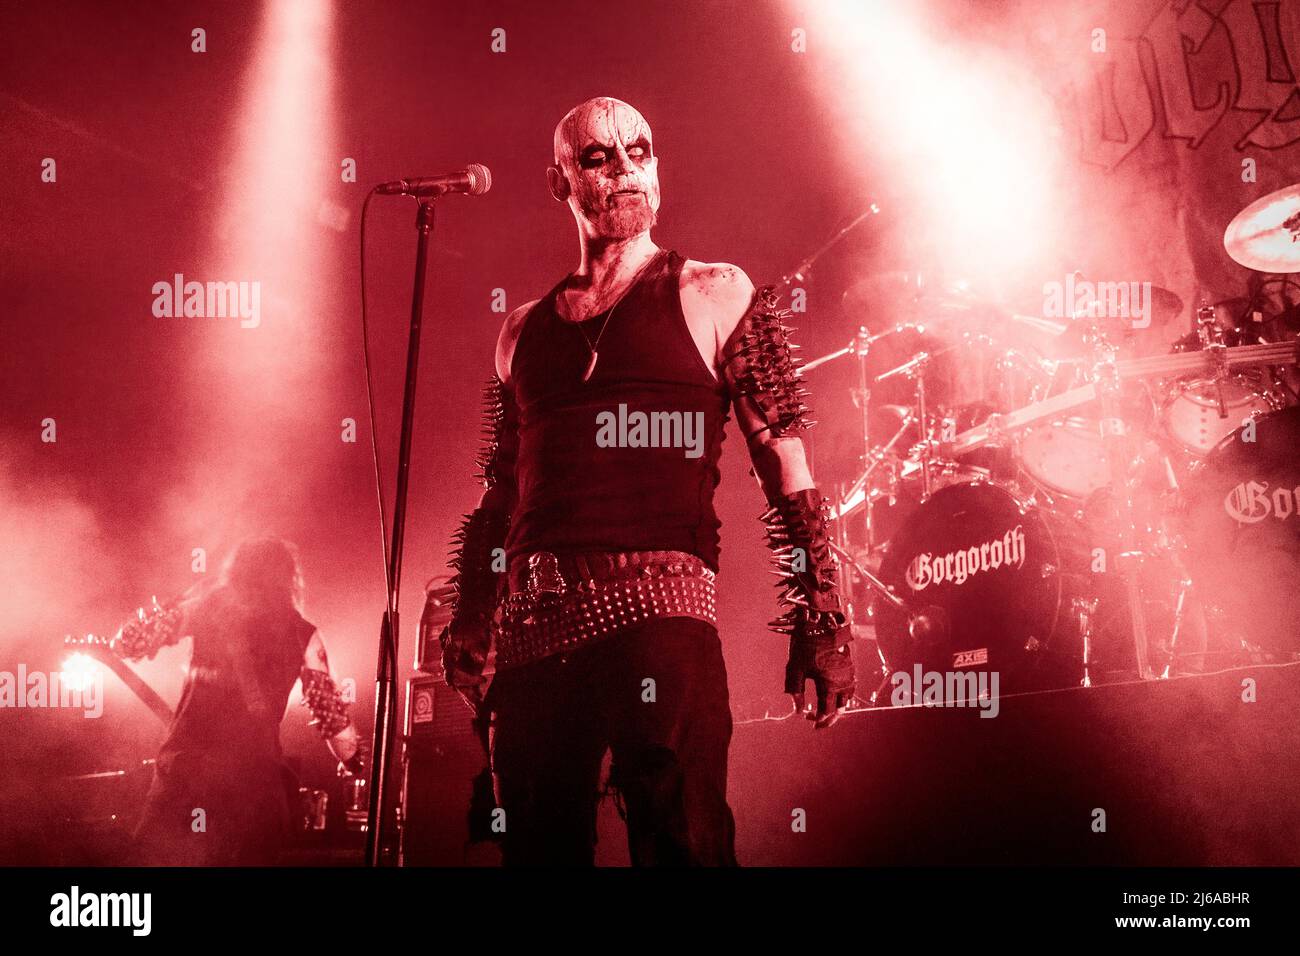 Oslo, Norway. 15th, April 2022. The Norwegian black metal band Gorgoroth performs a live concert at Rockefeller during the Norwegian metal festival Inferno Metal Festival 2022 in Oslo. Here vocalist Atterigner is seen live on stage. (Photo credit: Gonzales Photo - Terje Dokken). Stock Photo